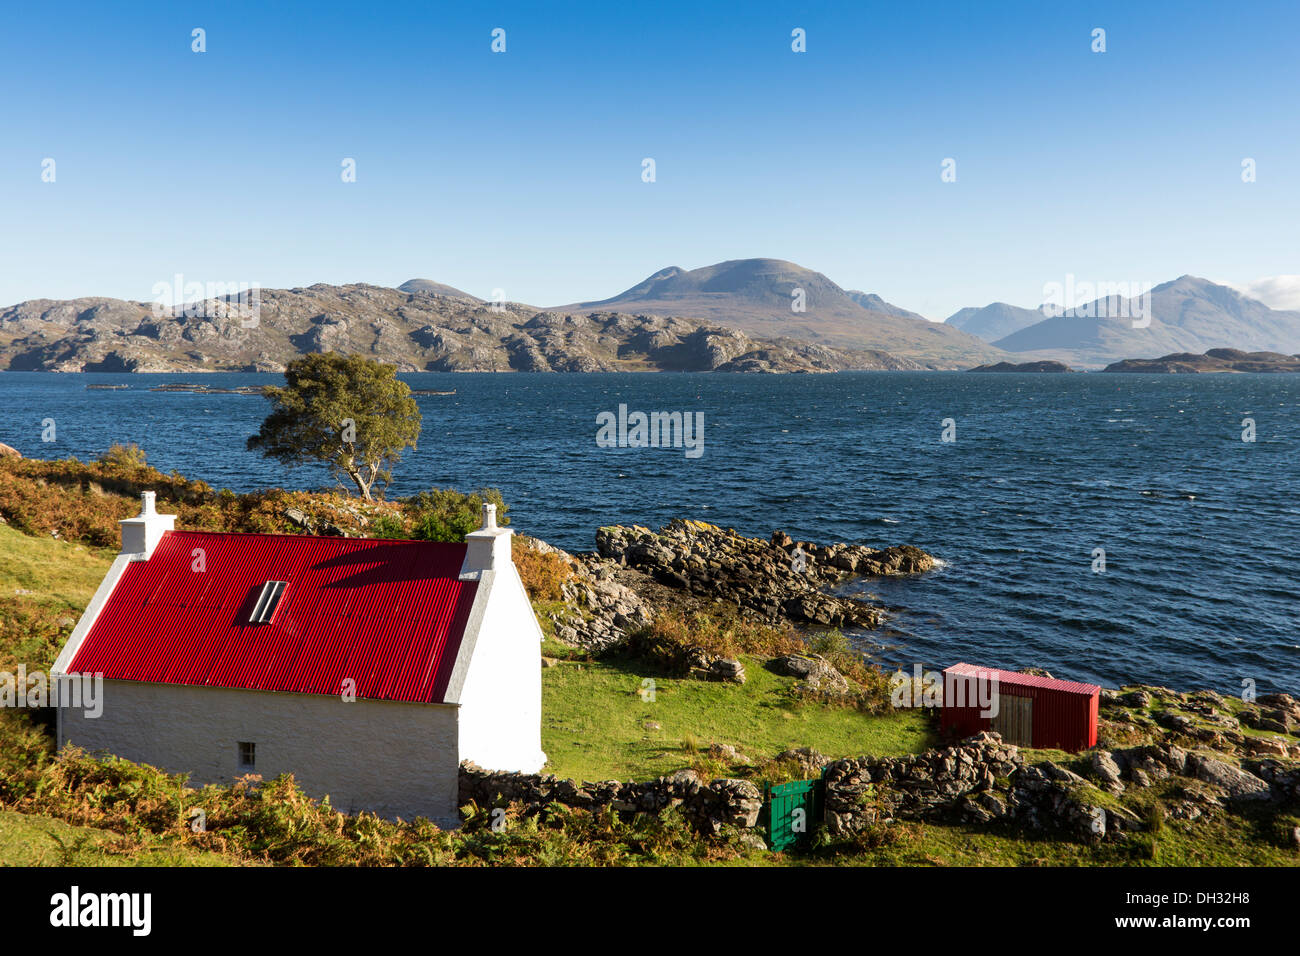 RED ROOF AND WHITE HOUSE ON SHORE OF LOCH TORRIDON WEST COAST SCOTLAND Stock Photo